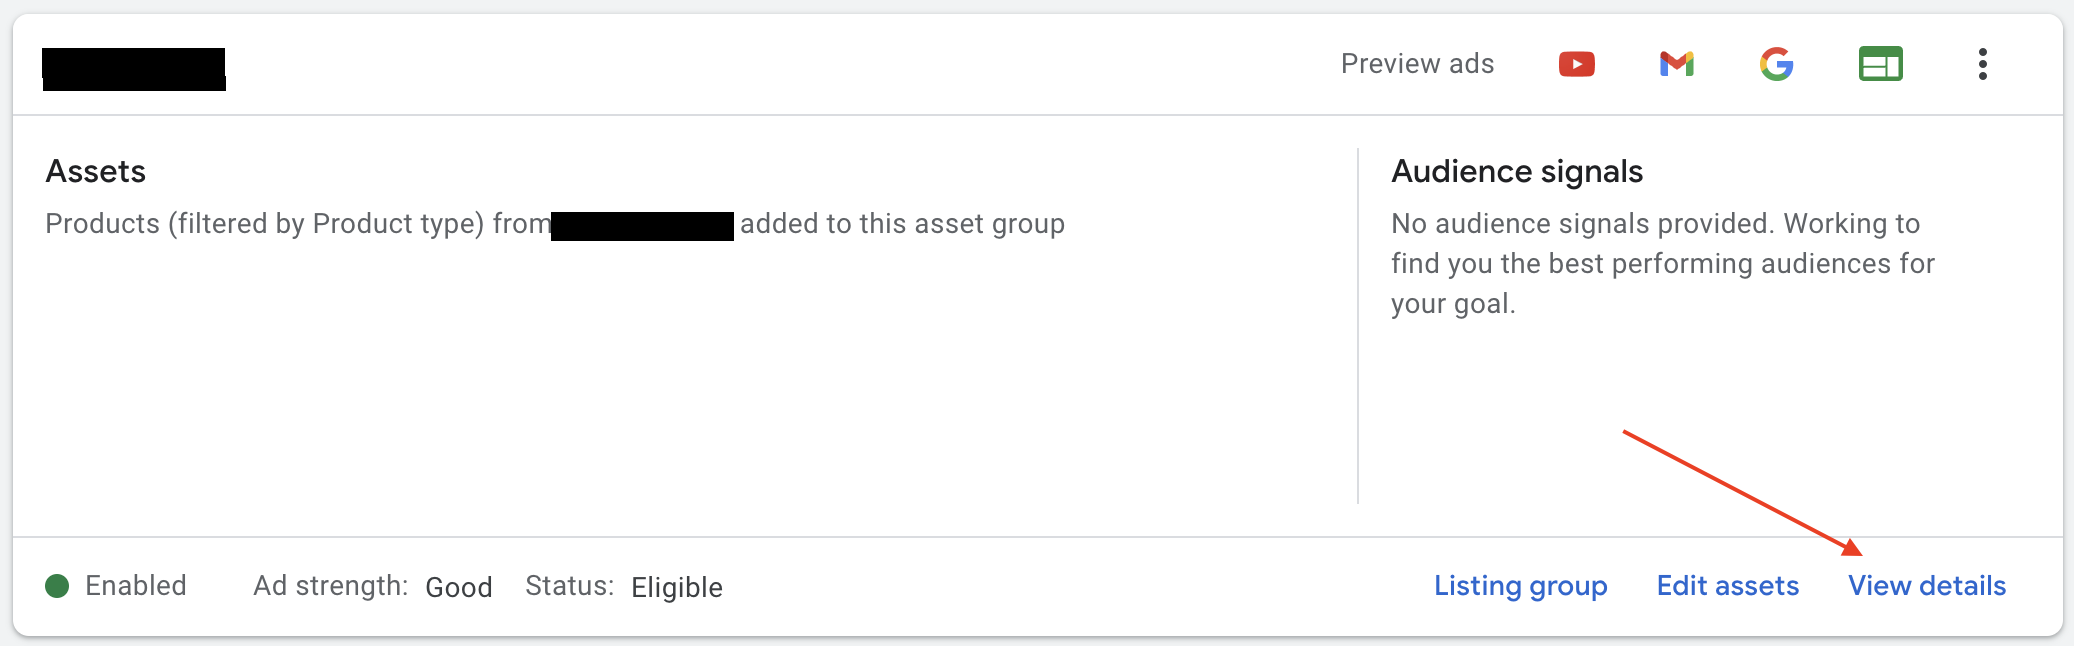 Screen shot of where to access assets within an asset group in the Google Ads interface for Performance Max campaigns